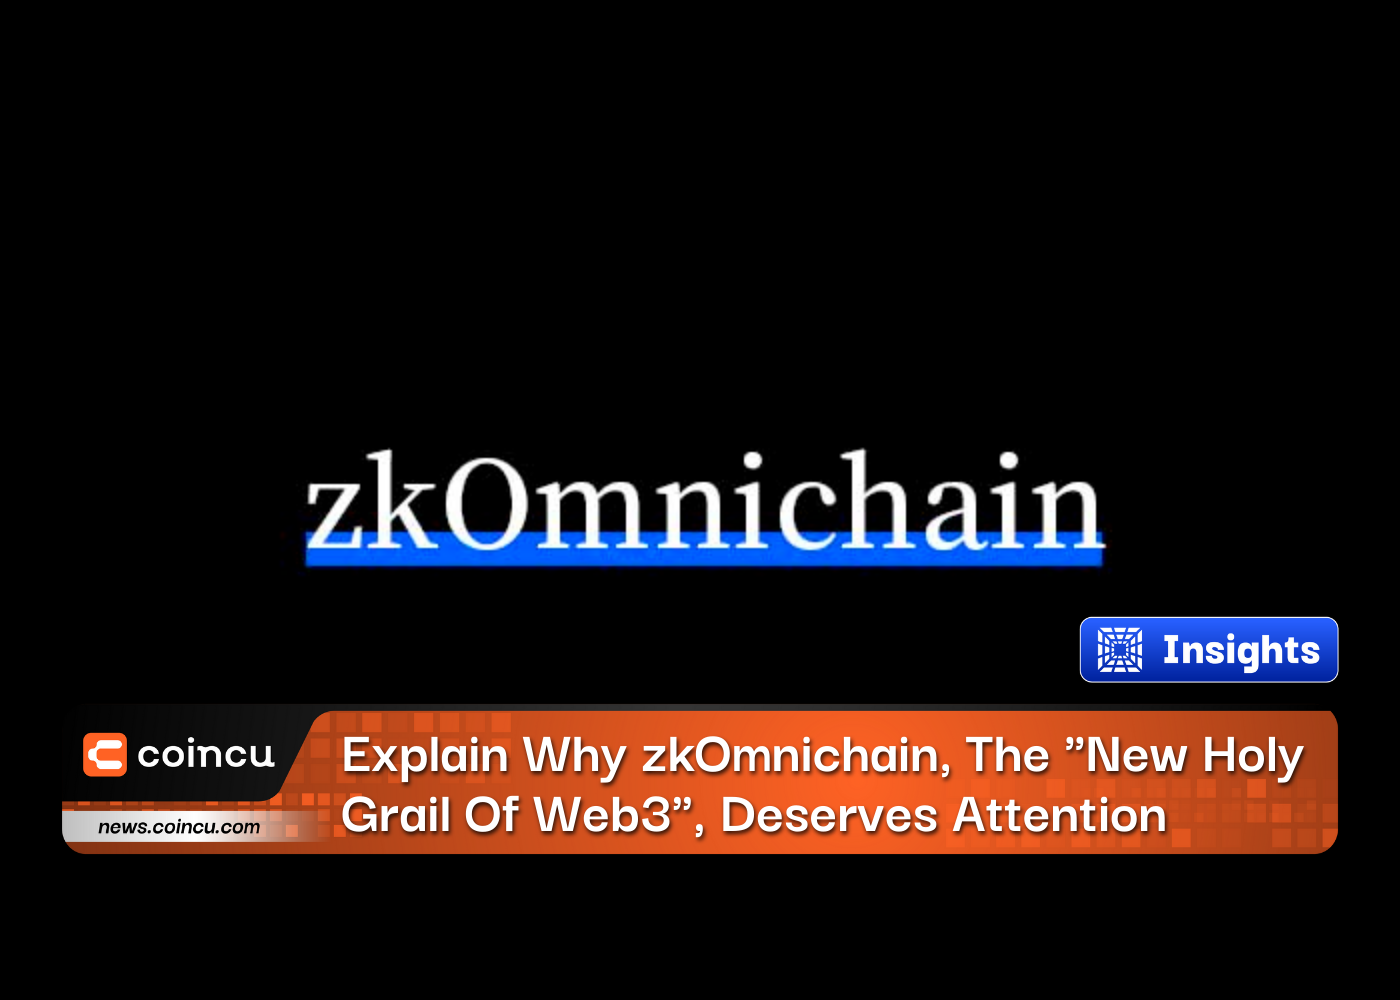 Explain Why zkOmnichain, The "New Holy Grail Of Web3", Deserves Attention